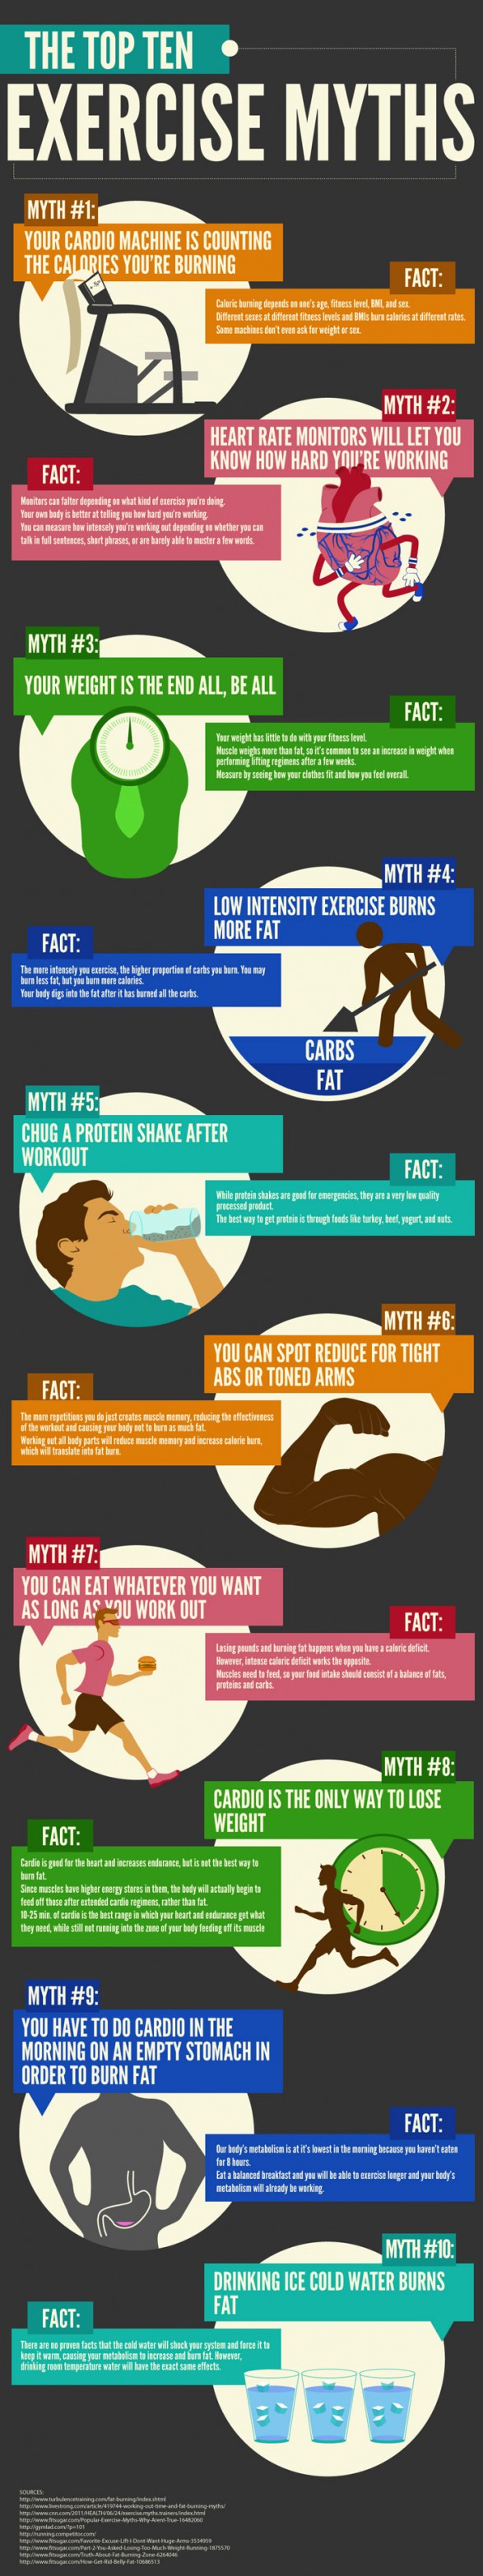 top-10-exercise-myths_5029118410866_w587